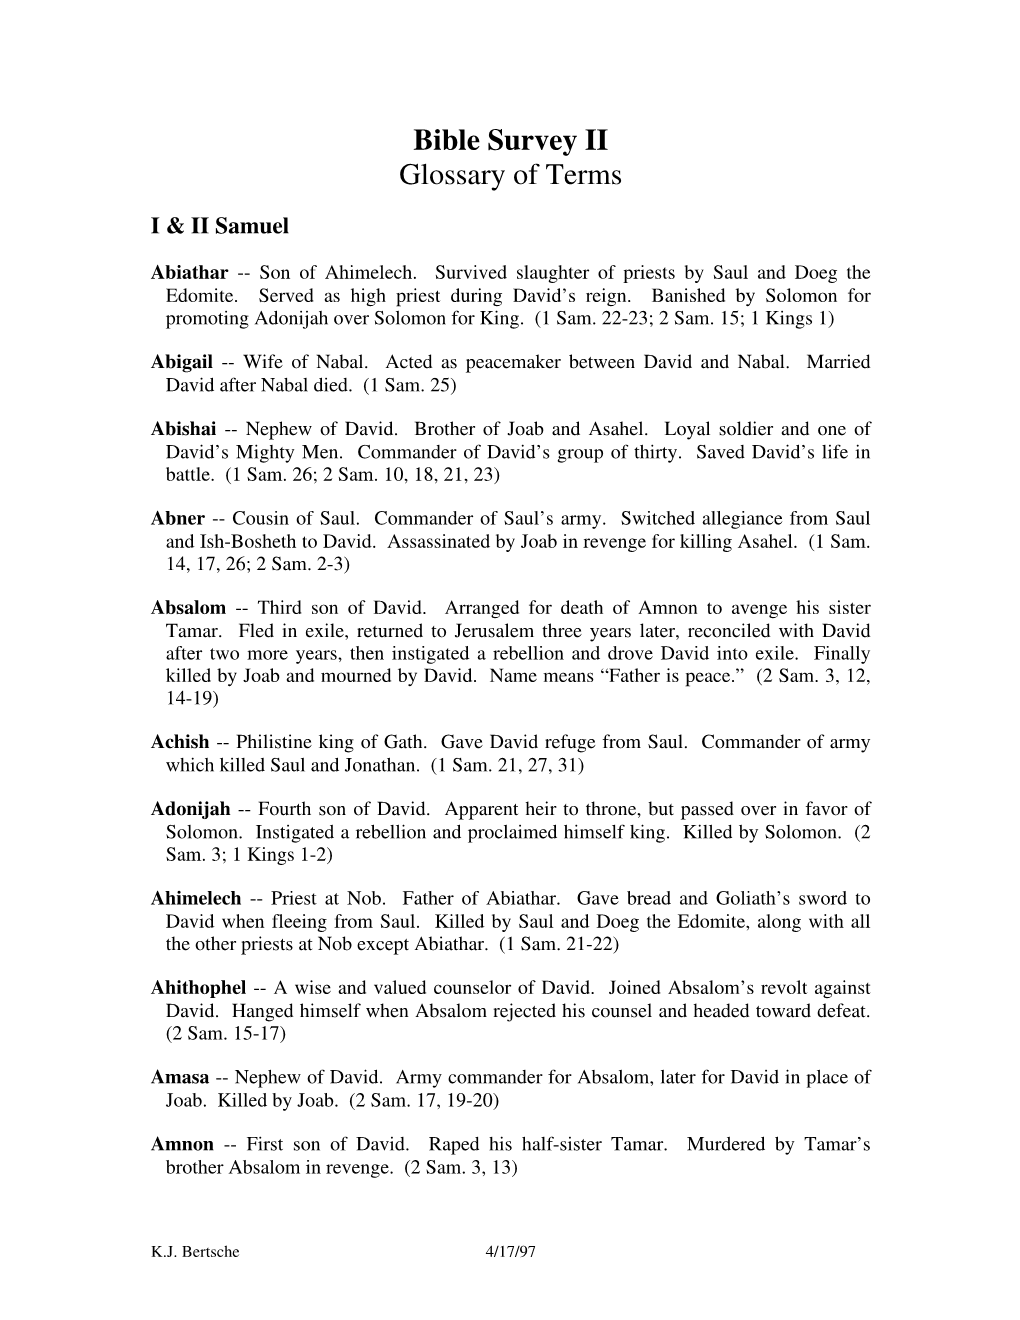 Bible Survey II Glossary of Terms